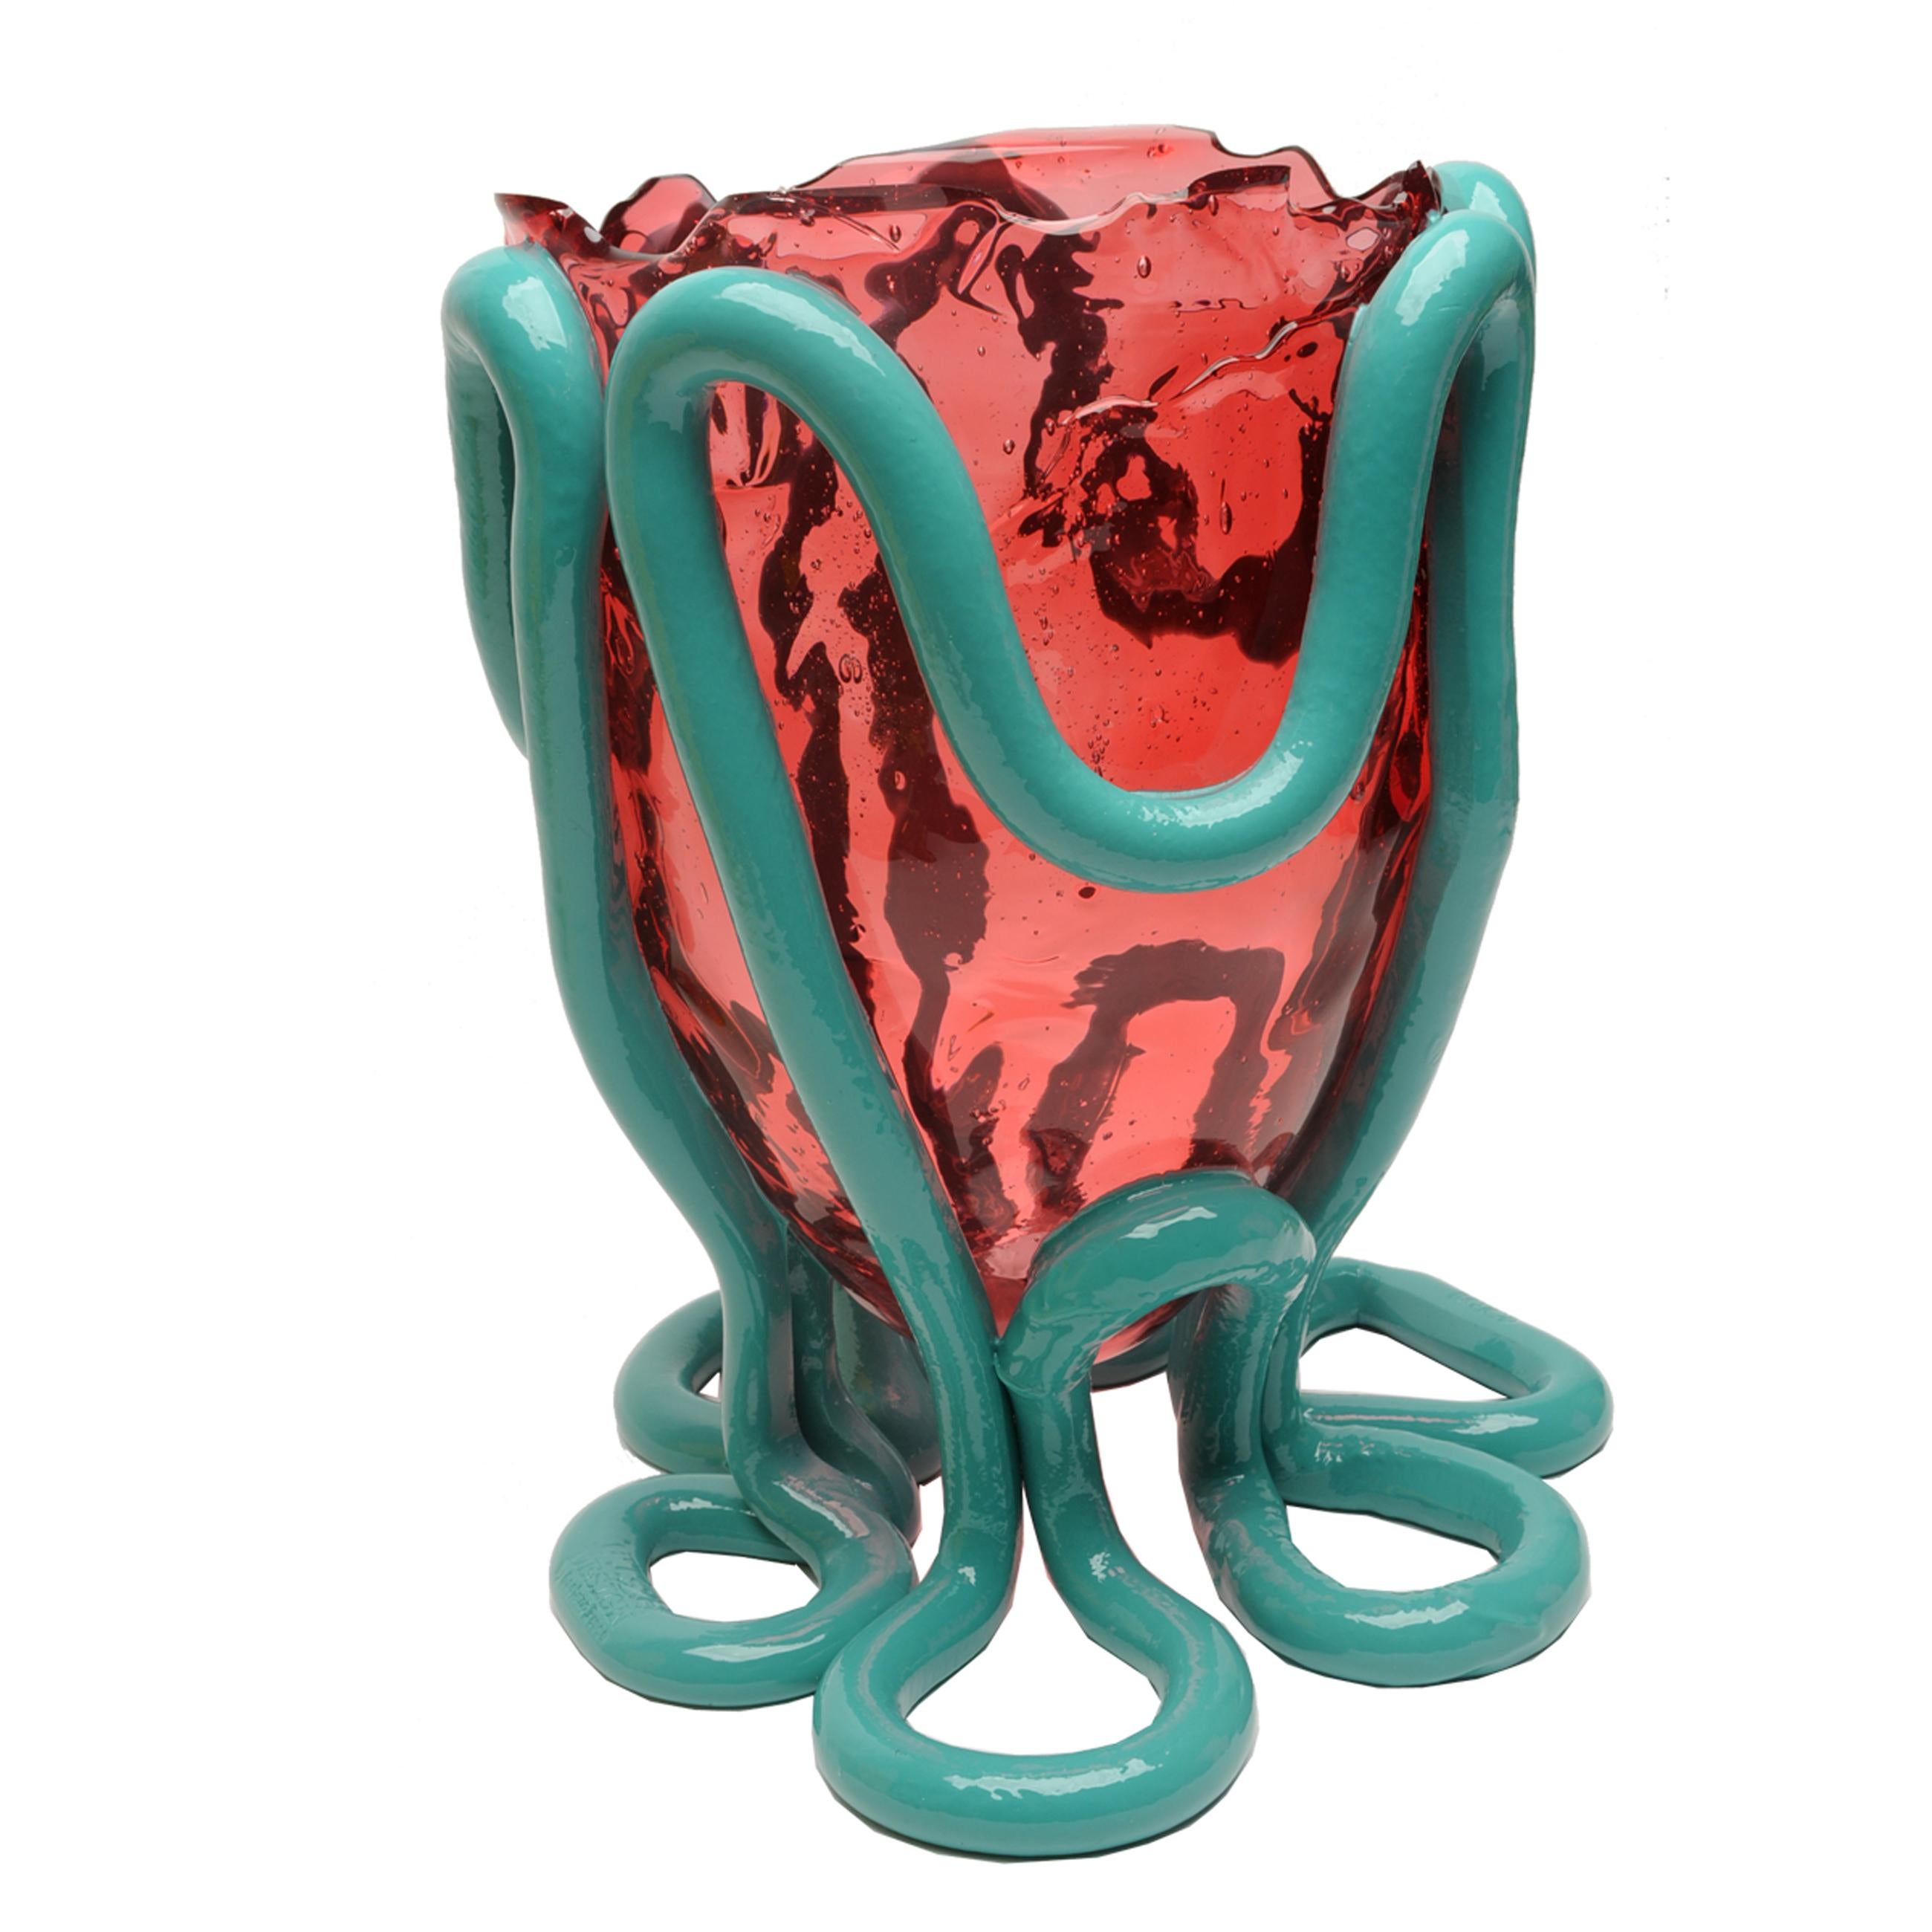 Indian Summer vase, clear light fuchsia and matt ocean blue

Vase in soft resin designed by Gaetano Pesce in 1995 for Fish Design collection.

Measures: XL - ø 30cm x H 56cm

Other sizes available.

Colours: clear light fuchsia and matt ocean